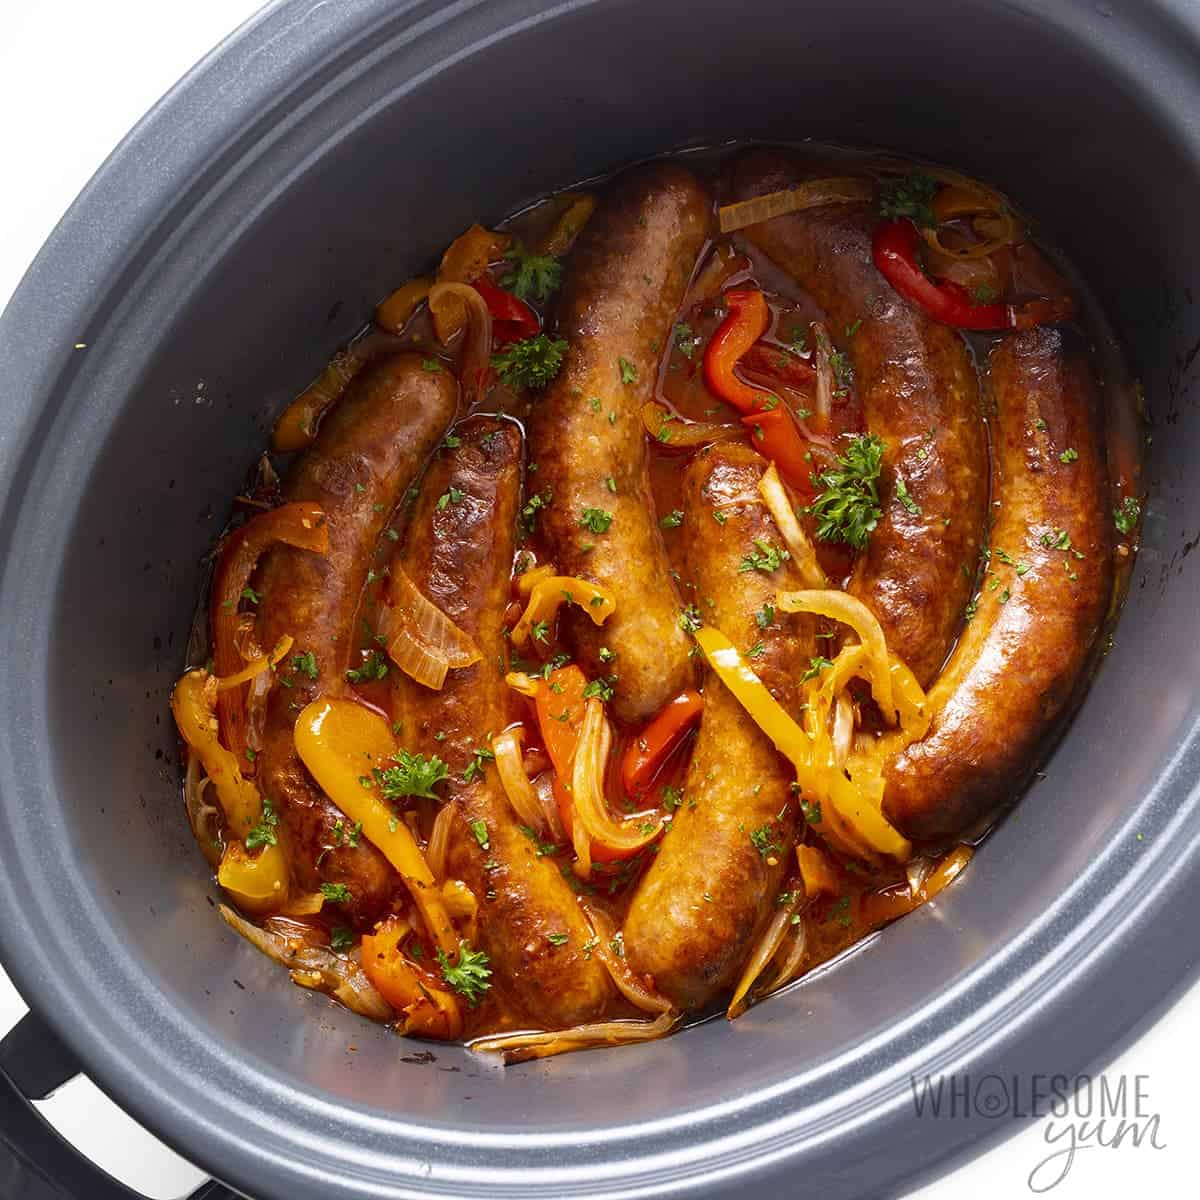 Cooked Crock Pot sausage and peppers.